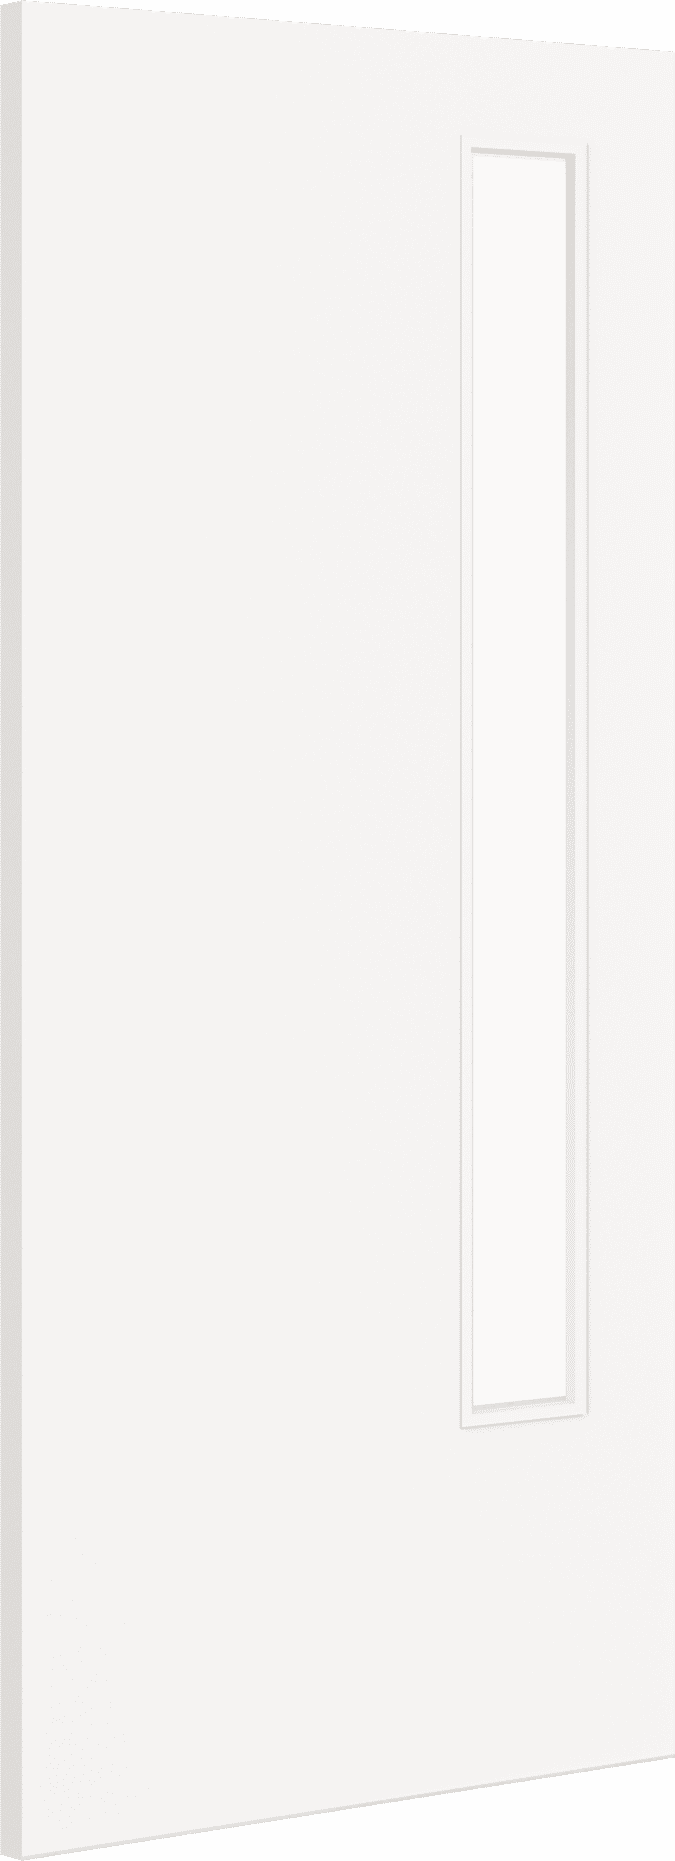 2040mm x 826mm x 44mm Architectural Paint Grade White 13 Frosted Glazed Fire Door Blank